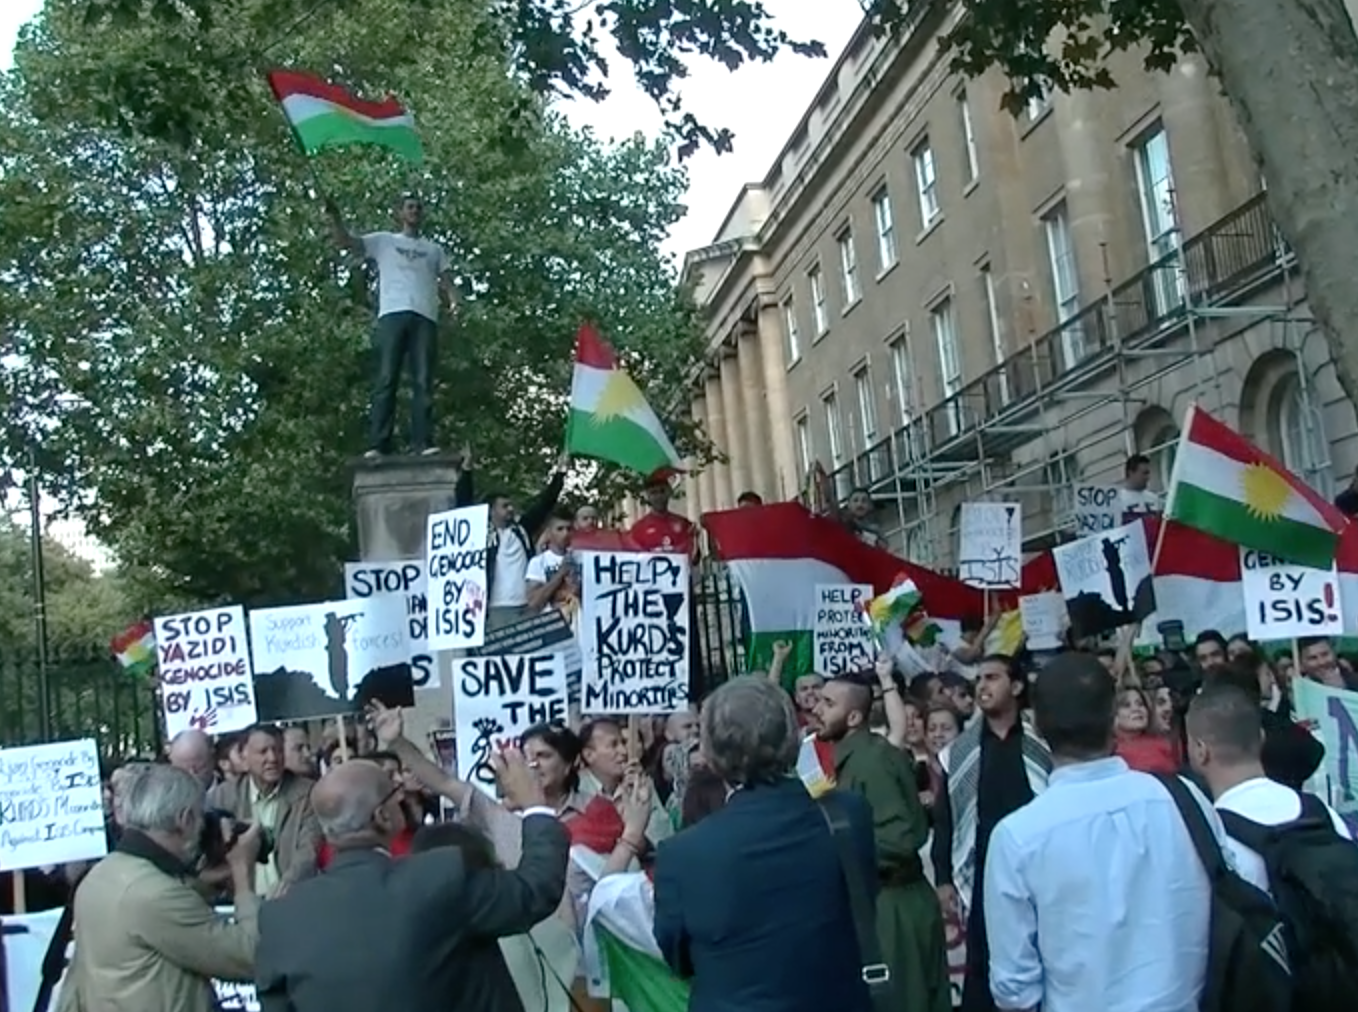 Major anti-ISIS Rally Planned for London, Concerns over EDL, Islamist Attendance